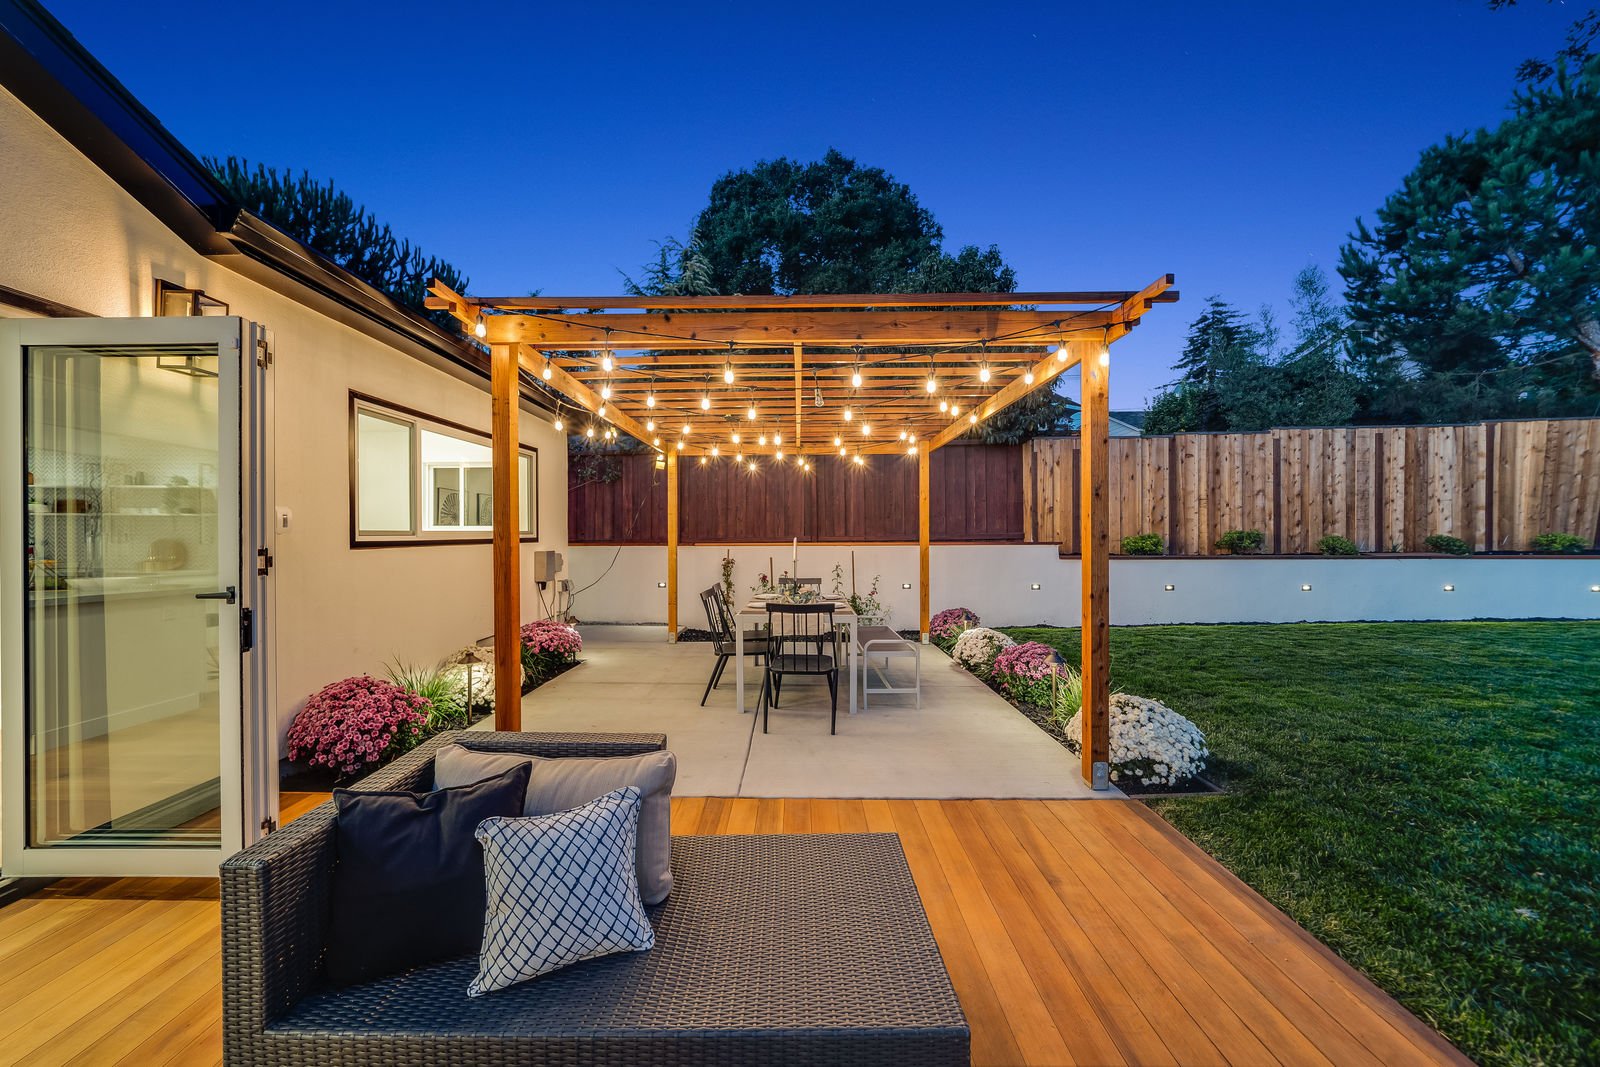 Side view of a back deck and concrete patio with overhead wooden pergola covered in string lights